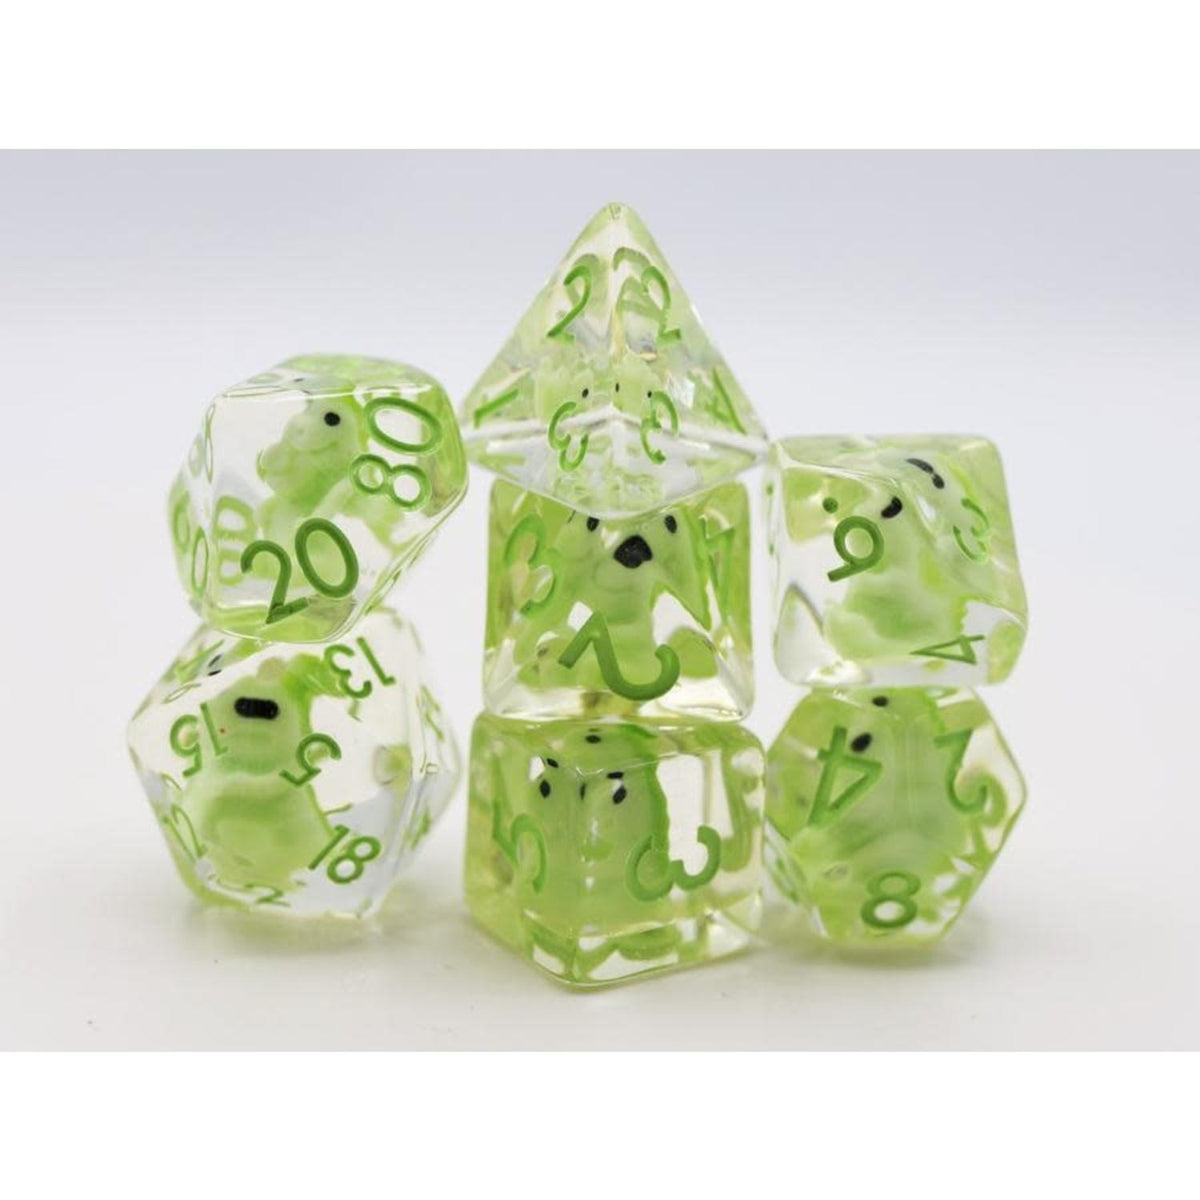 Upgrade Your Gaming Experience with Foam Brain <a href='/metal-dice/'>Metal Dice</a> and Accessories